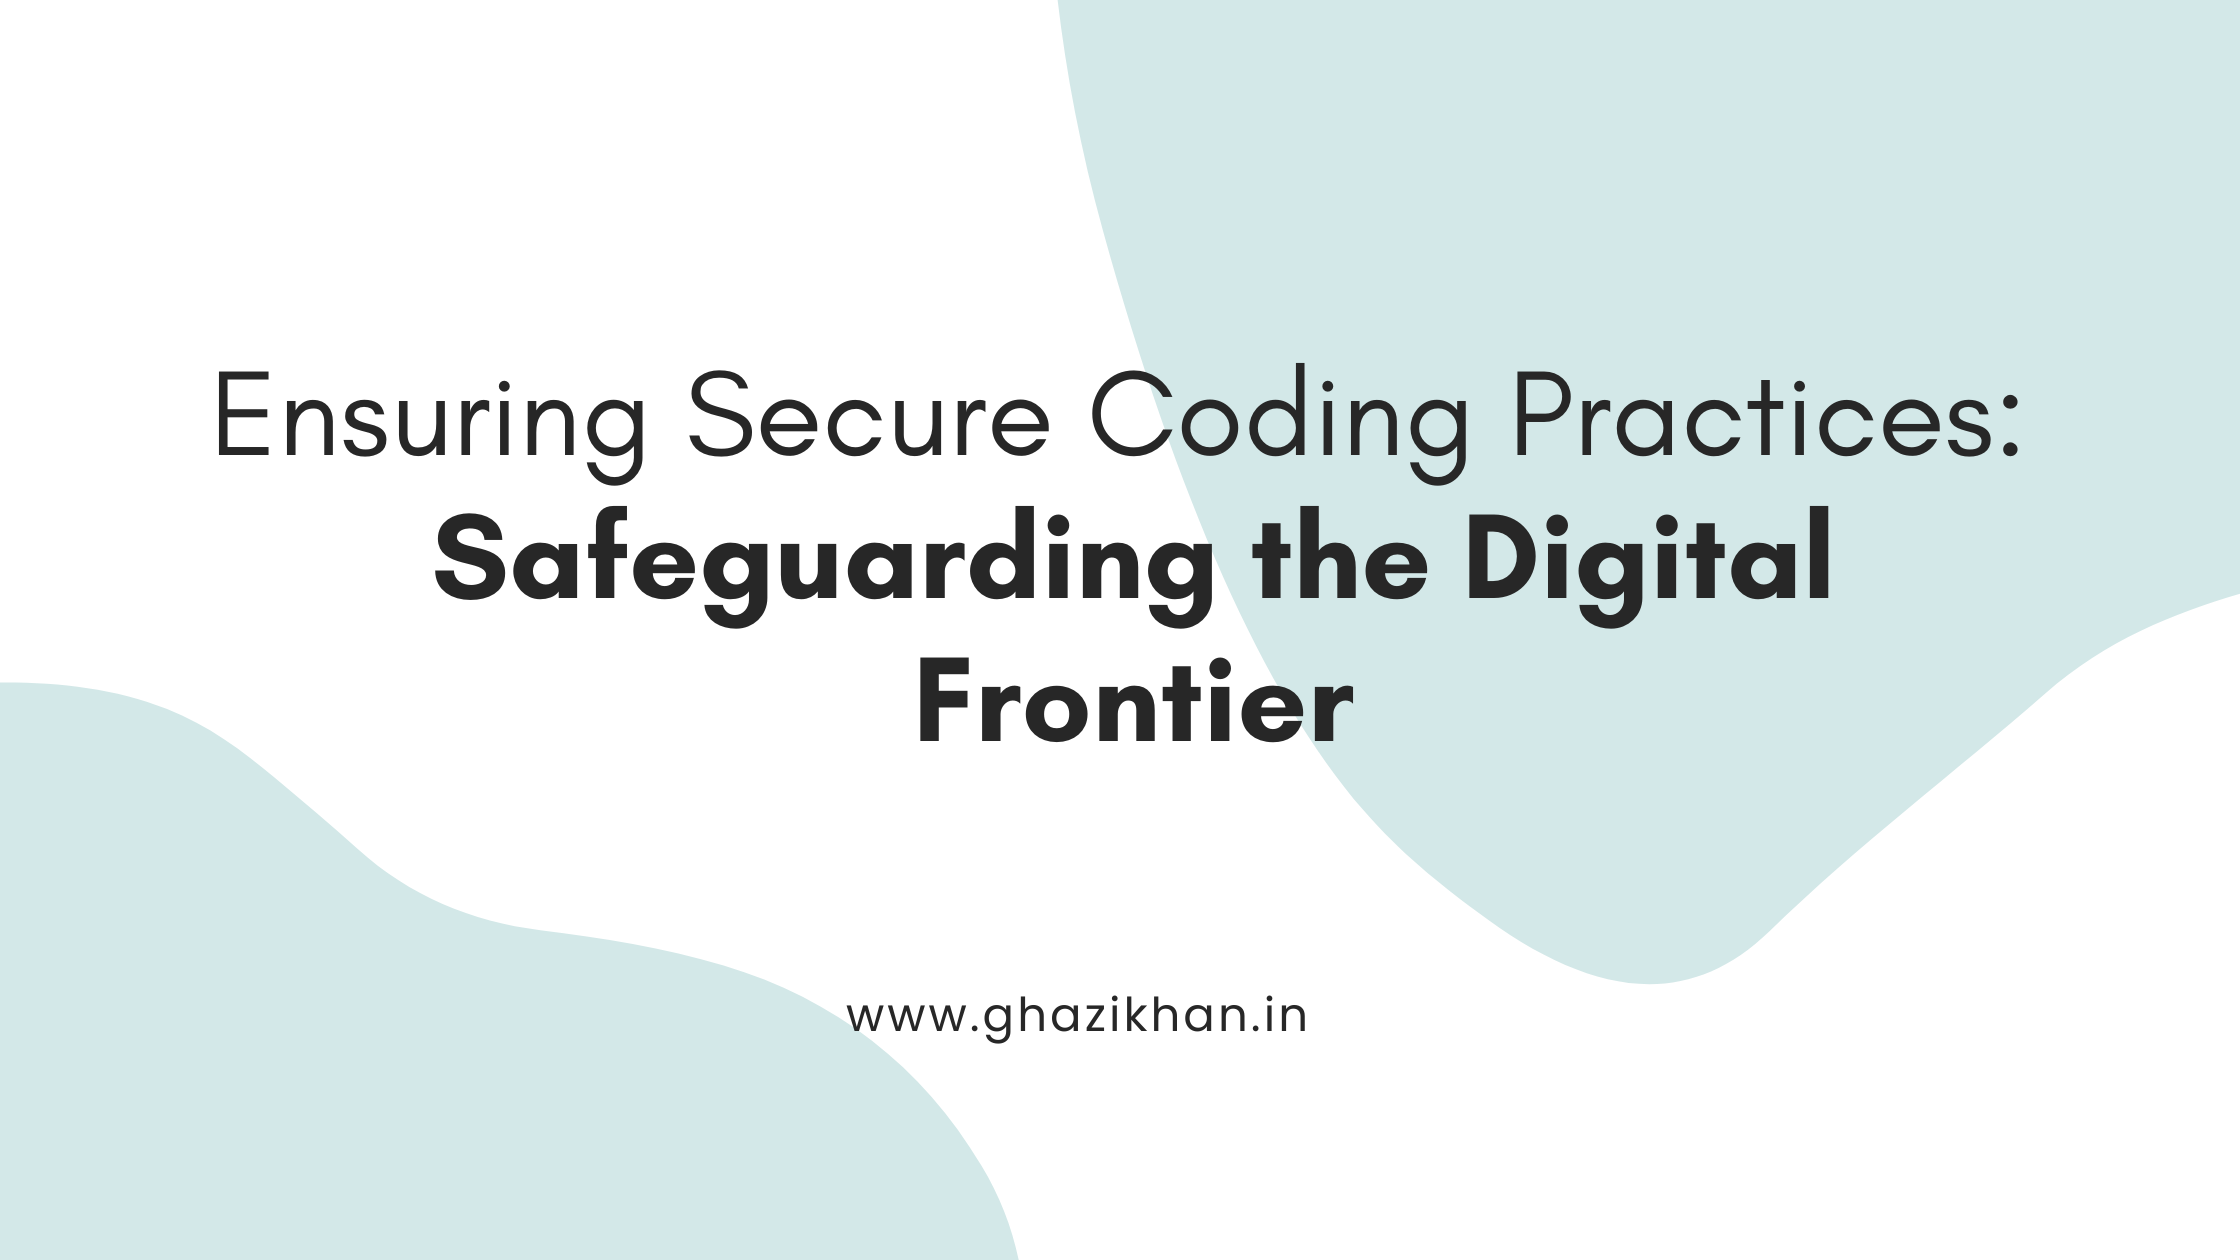 Ensuring Secure Coding Practices: Safeguarding the Digital Frontier